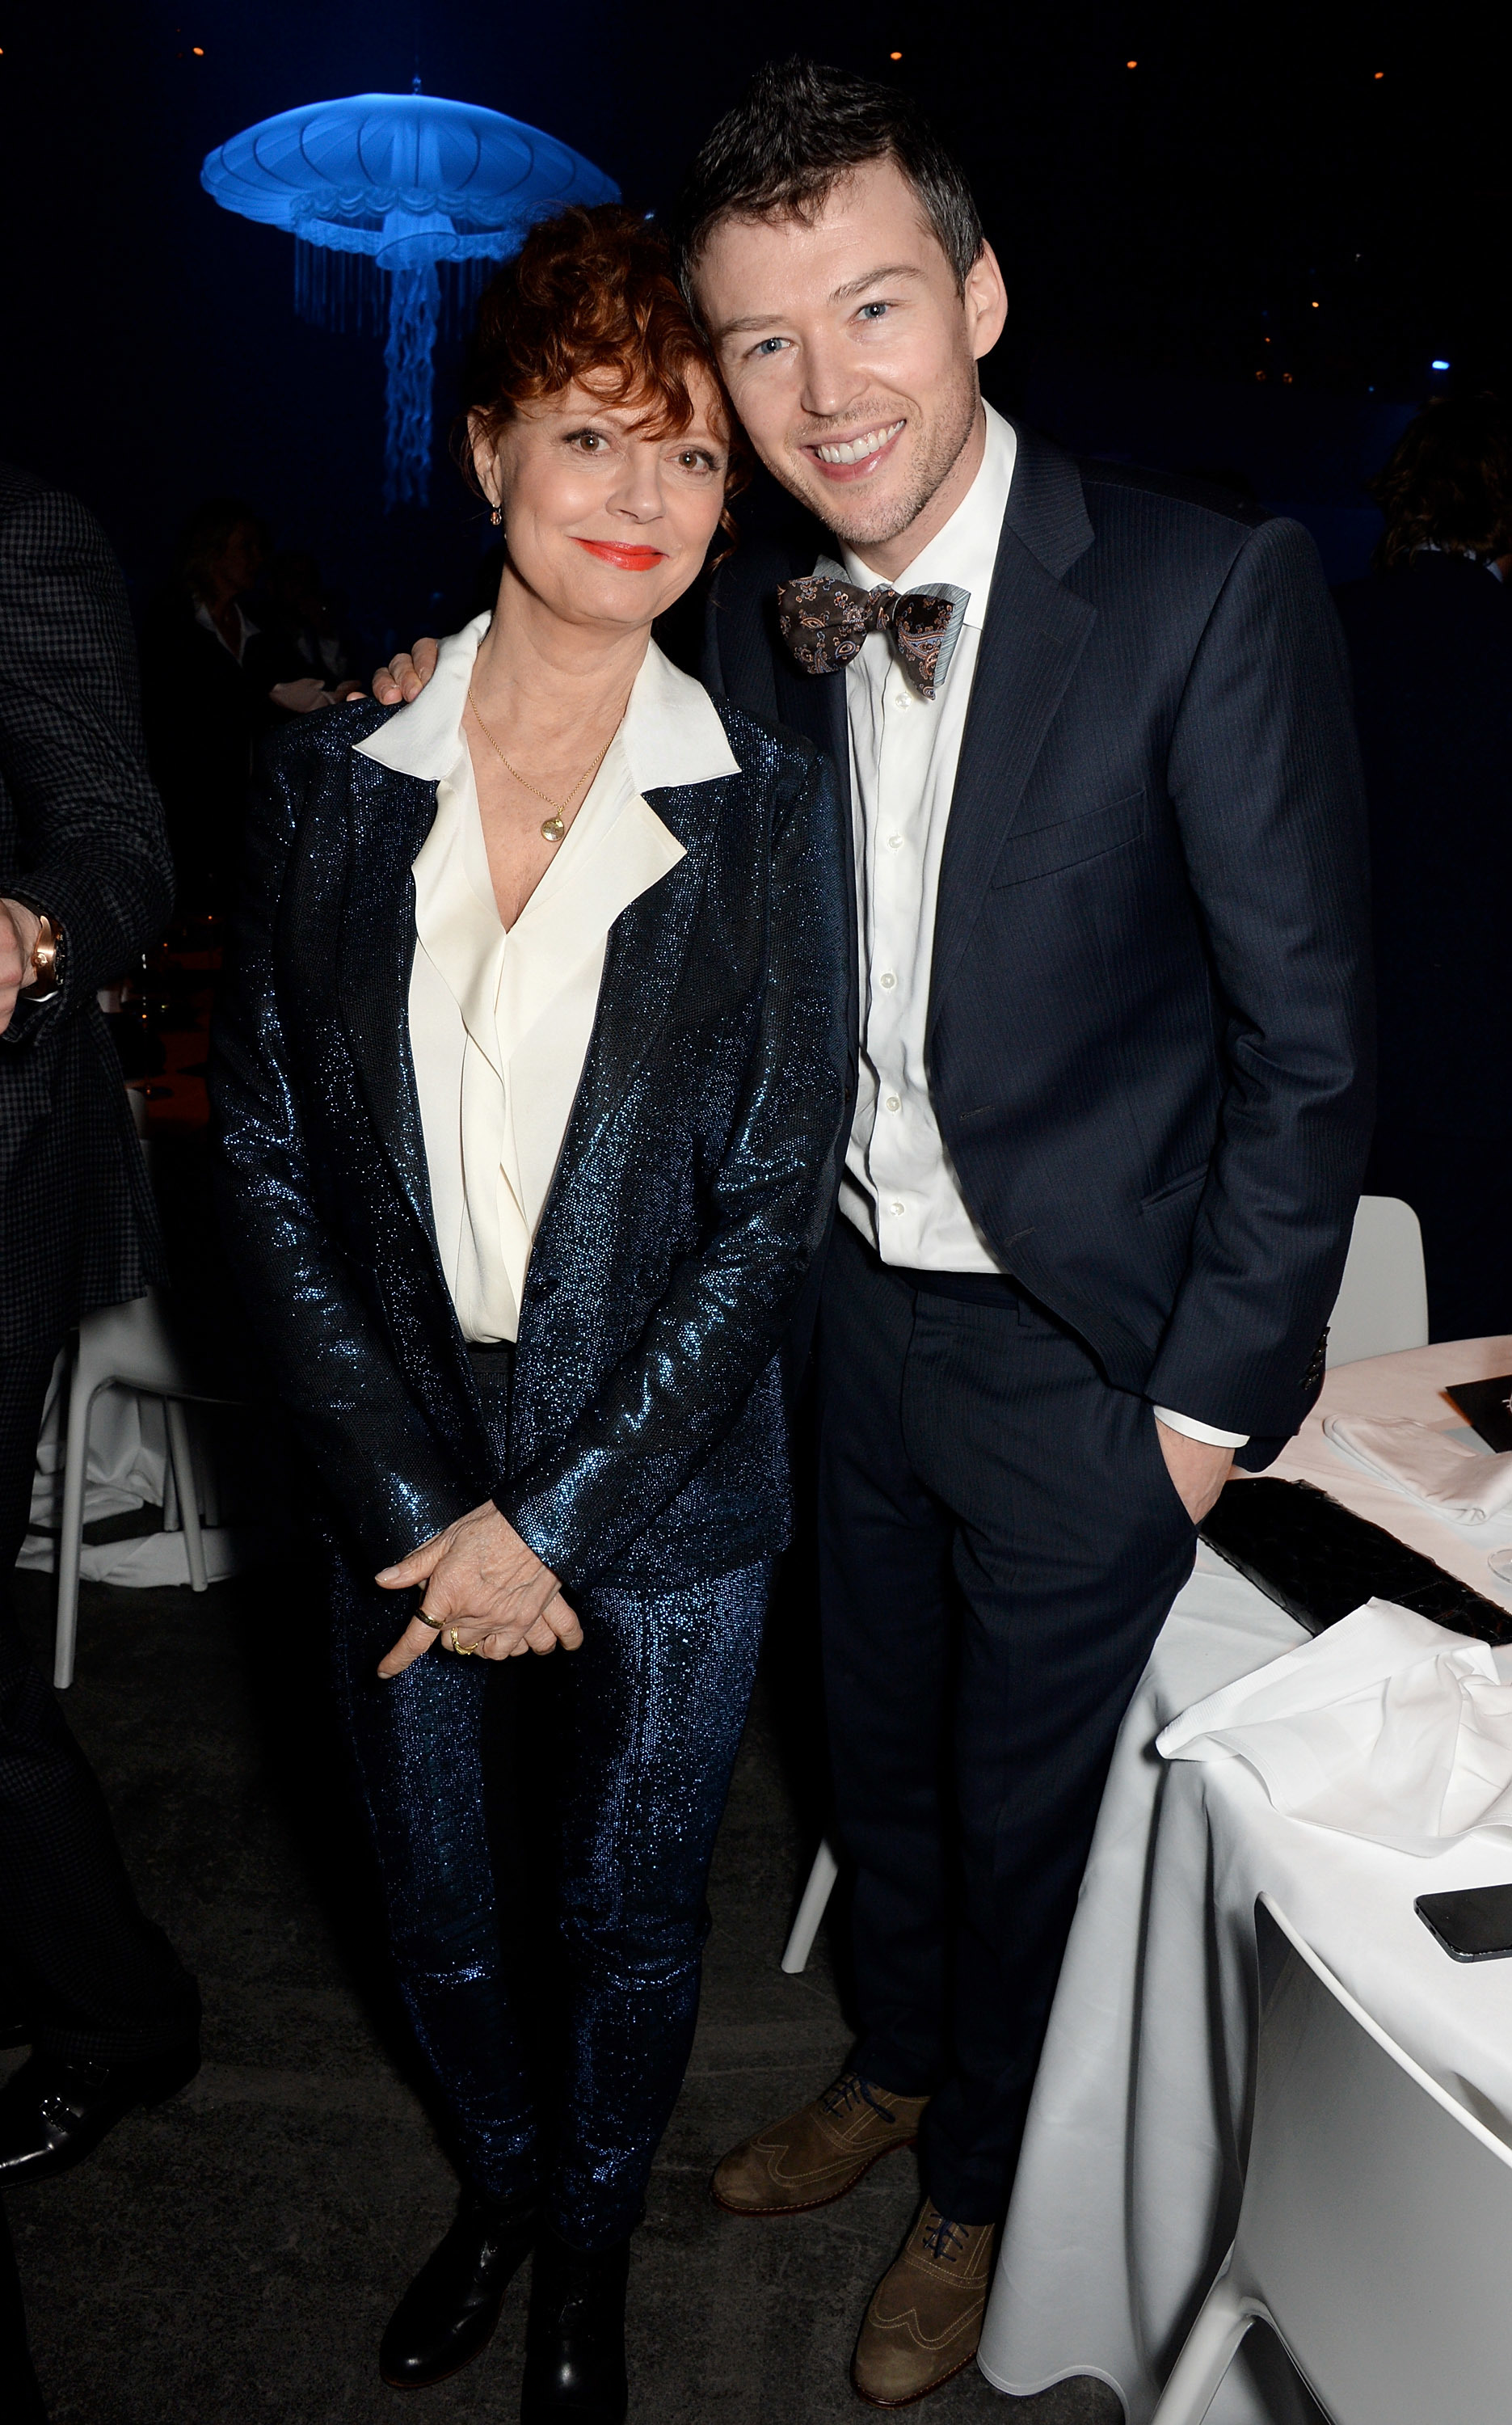 <p>Jonathan Bricklin and Susan Sarandon raised eyebrows for their 30-year age gap when they started dating after her high-profile breakup with Tim Robbins. She ultimately split with Jonathan after six years.</p>